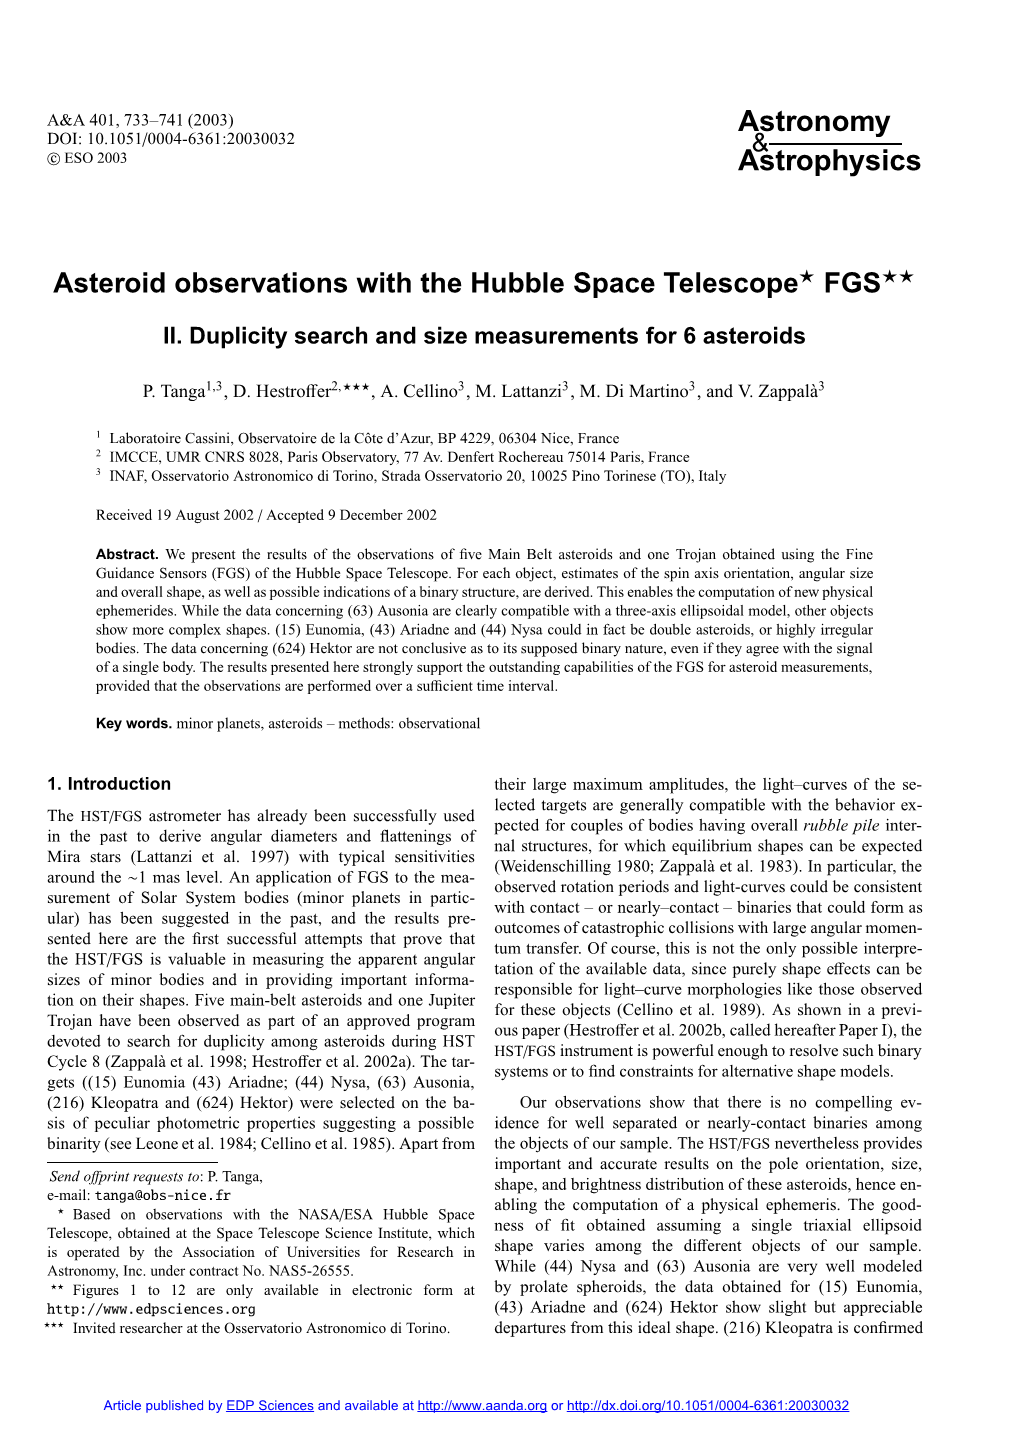 Asteroid Observations with the Hubble Space Telescope? FGS??